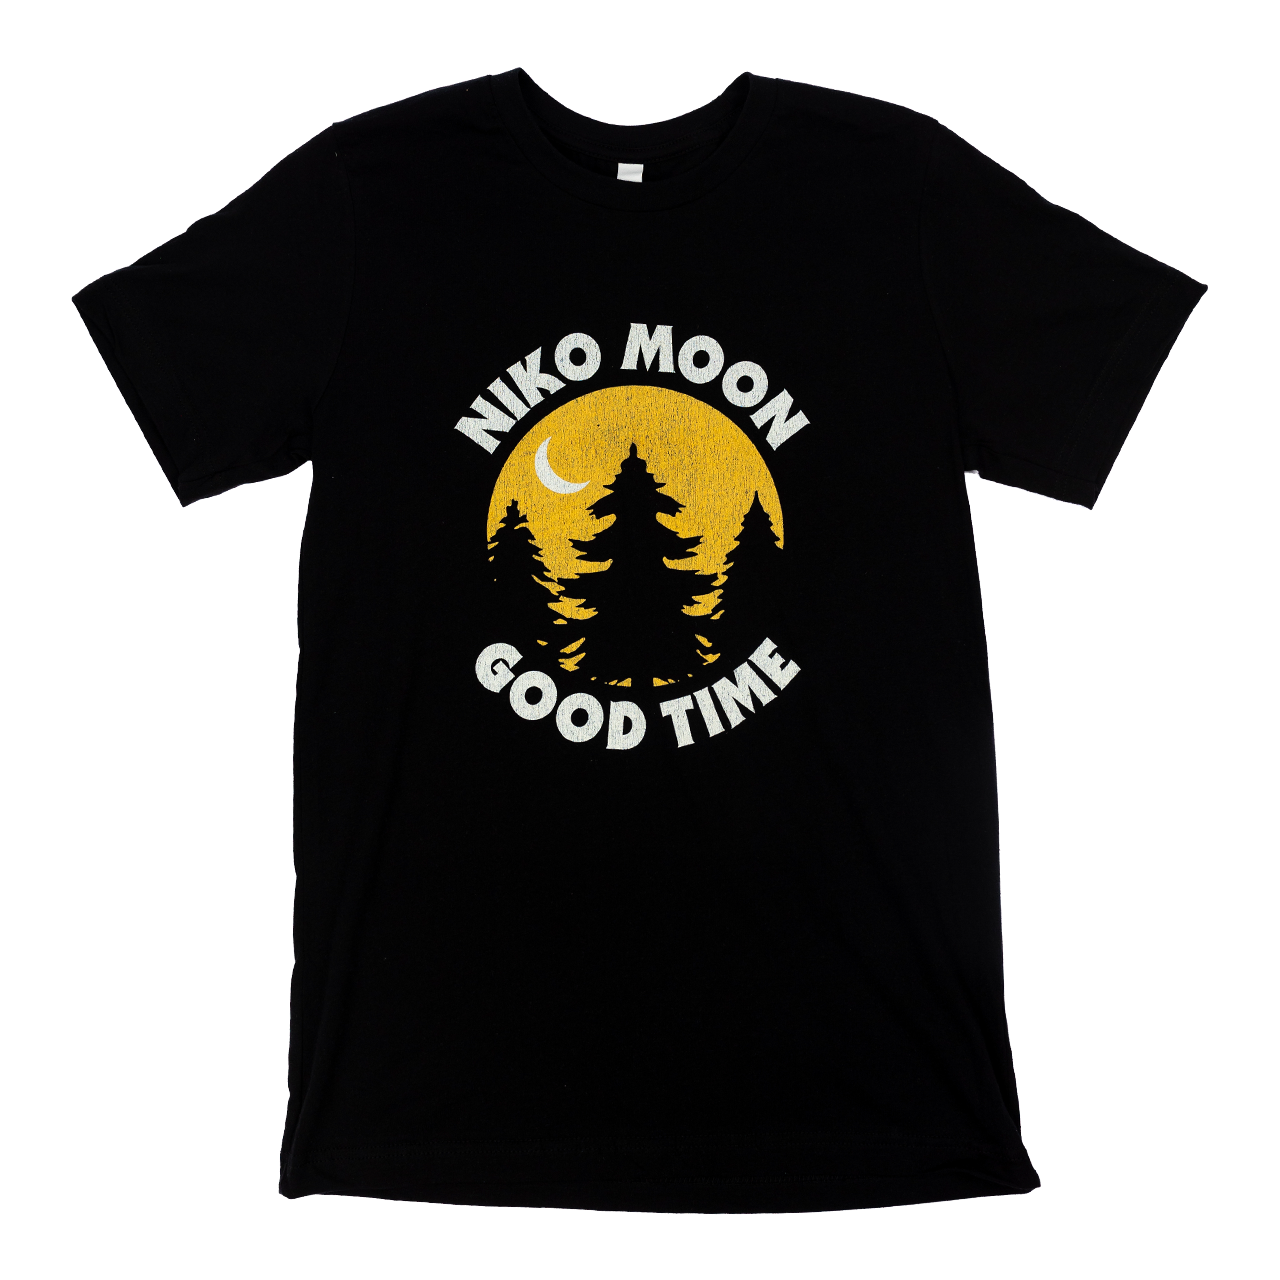 Good Time Forest Tee